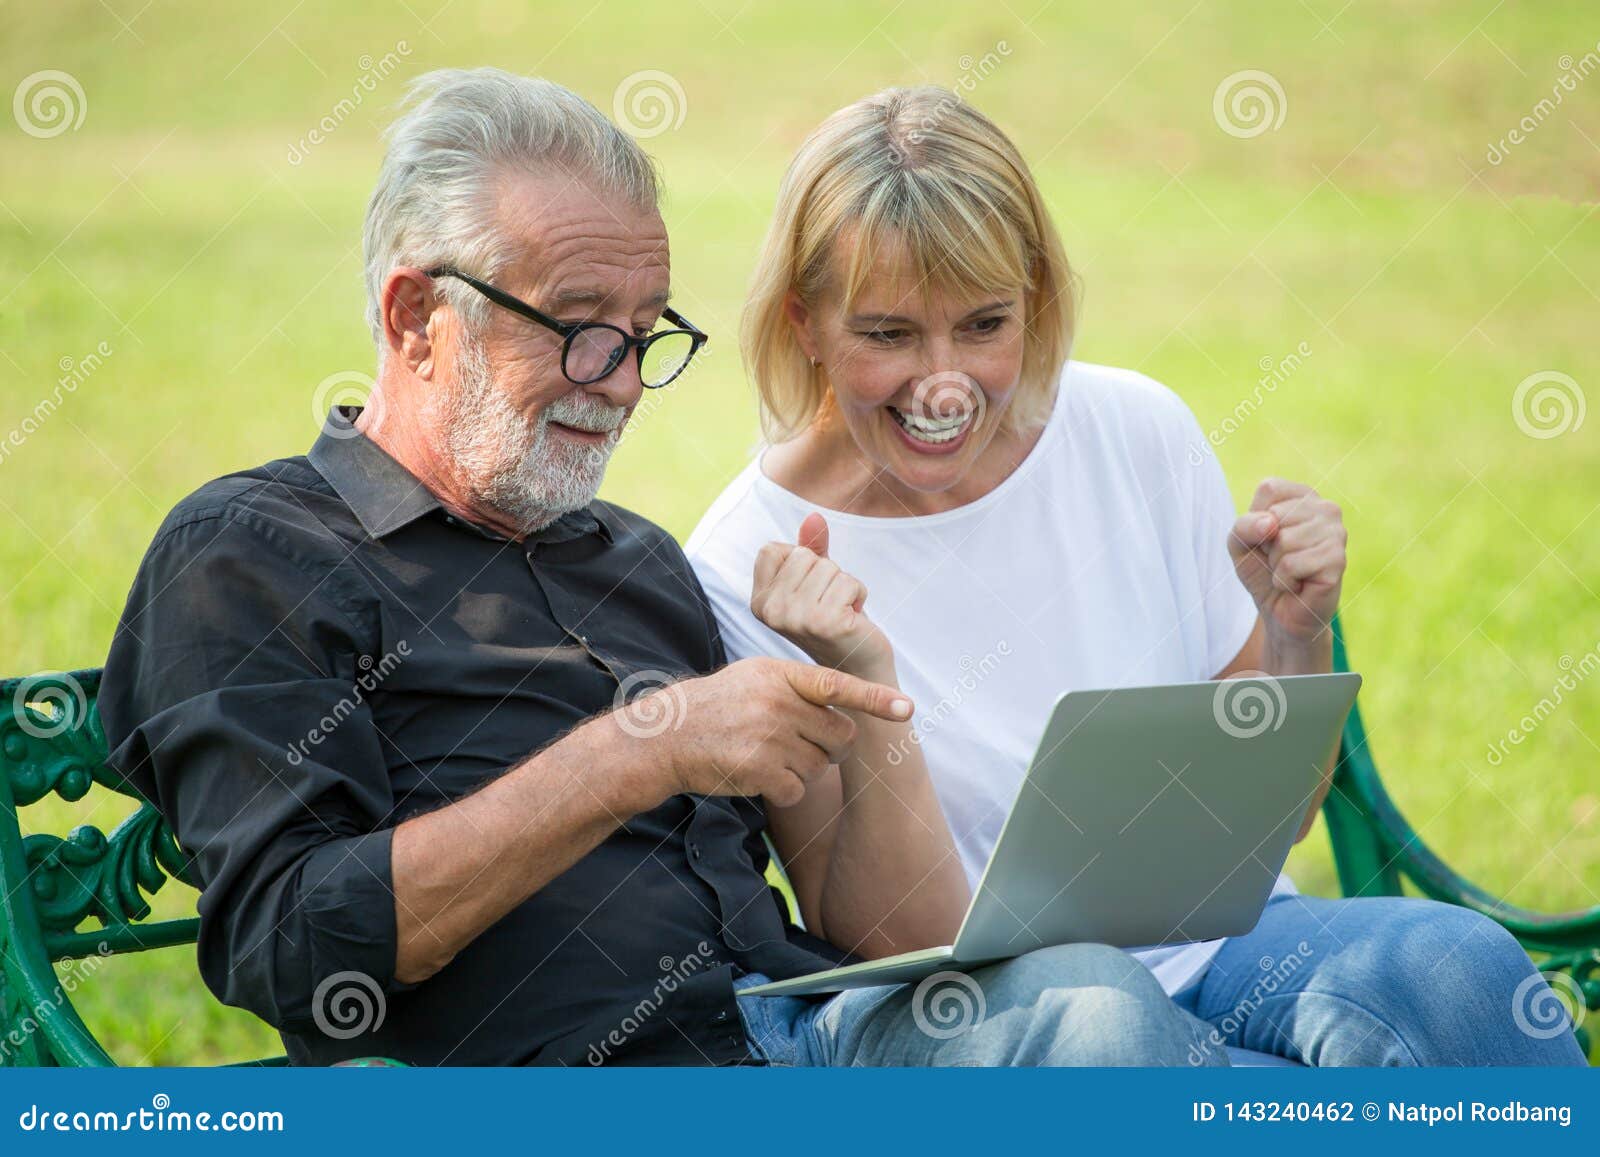 happy senior loving couple relaxing with laptop computer at park excited together in morning time. old people sitting on a bench